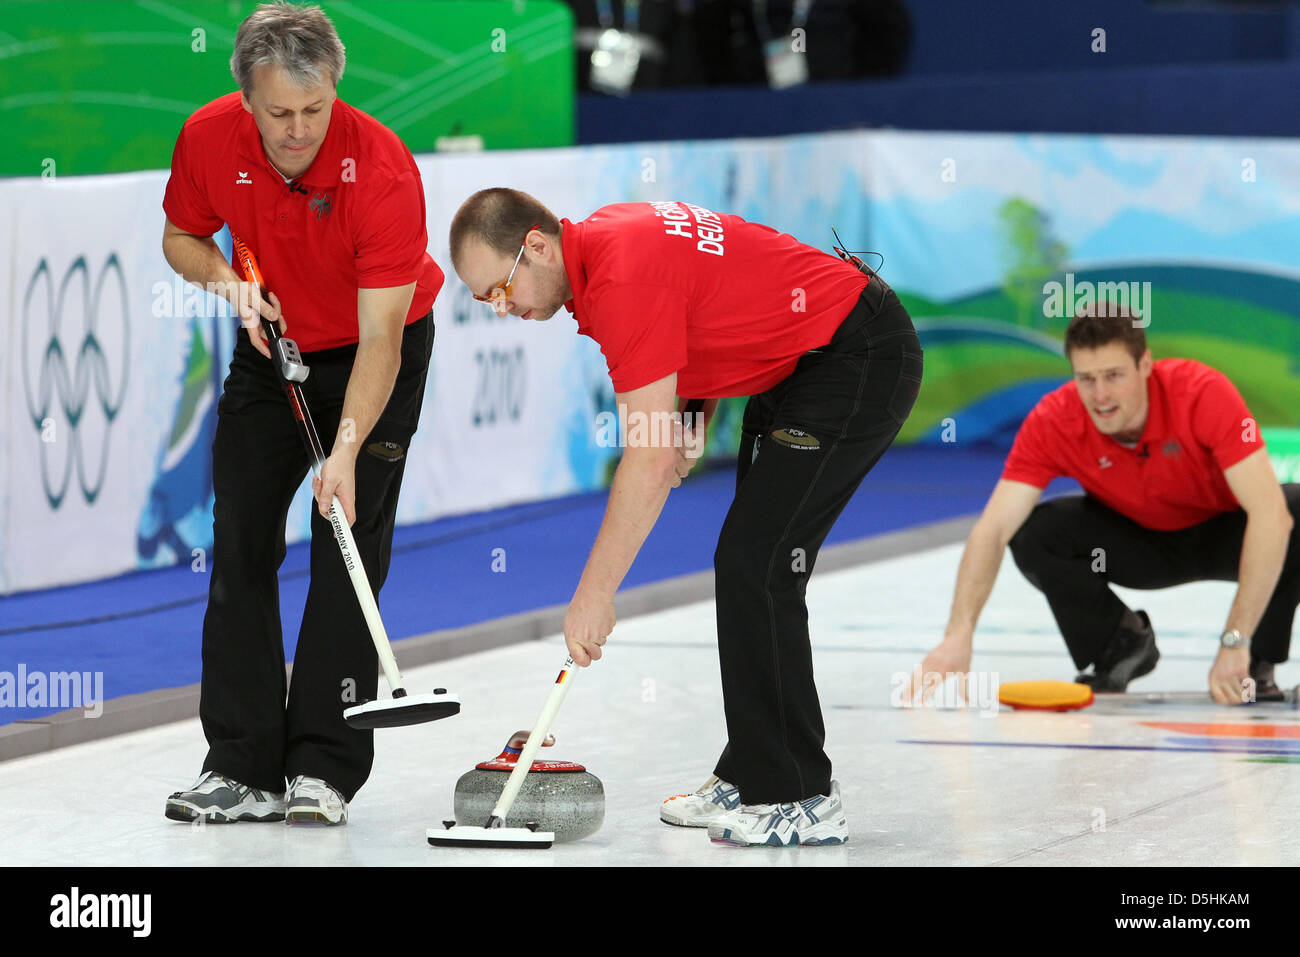 Skip Andy Lang (R) releases his stone as Andreas Kempf (L) and Holger Hoehne guide it during Curling men's round robin session 3 at the Olympic Center during the Vancouver 2010 Olympic Games in Vancouver, Canada 17 February 2010. Germany's opponent was Sweden. Photo: Daniel Karmann  +++(c) dpa - Bildfunk+++ Stock Photo